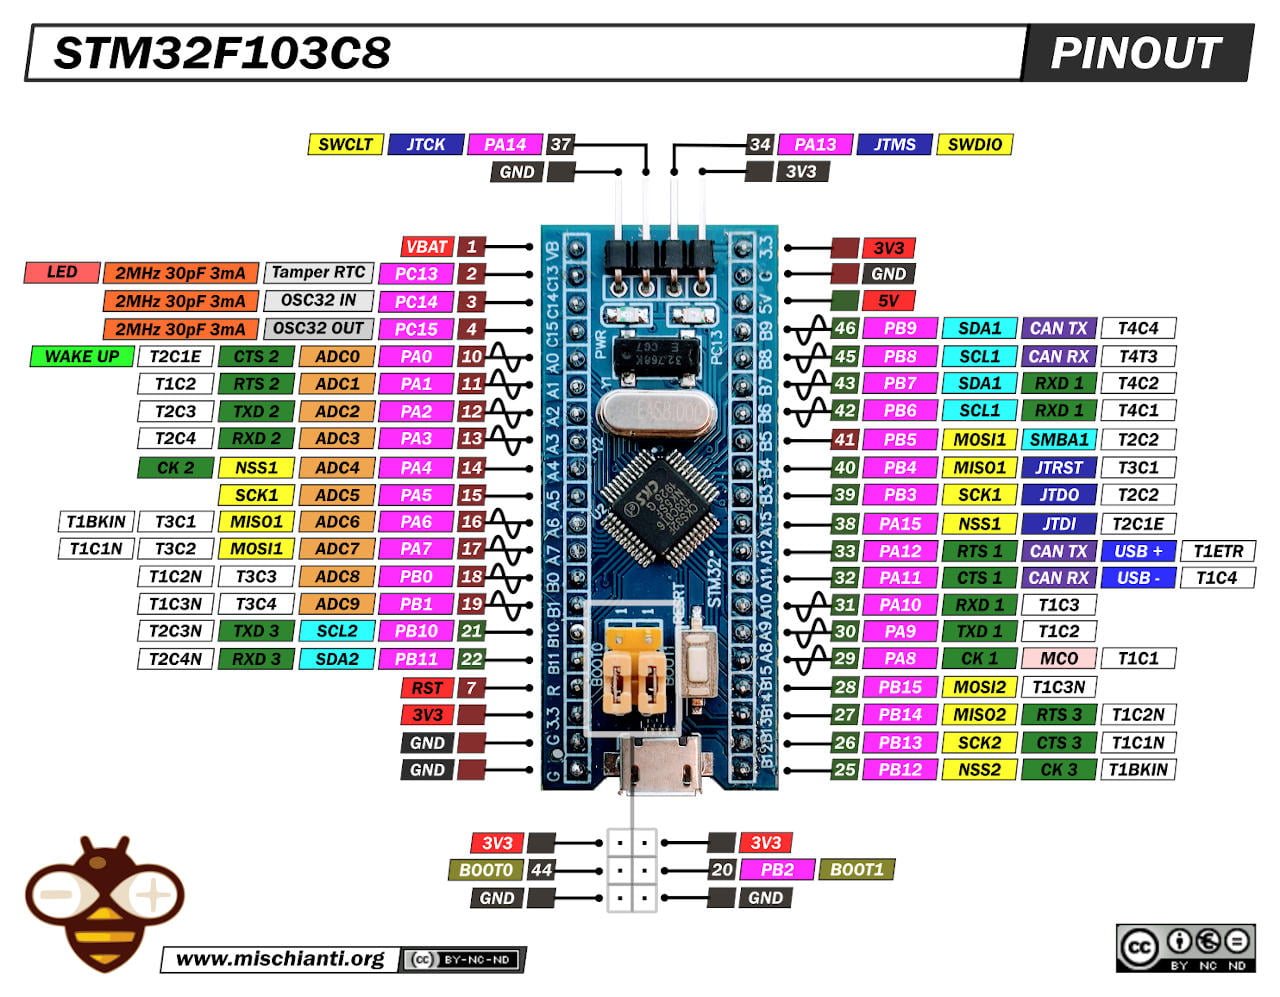 Stm32f1 Pinout Specs And Arduino Ide Configuration Stm32duino And